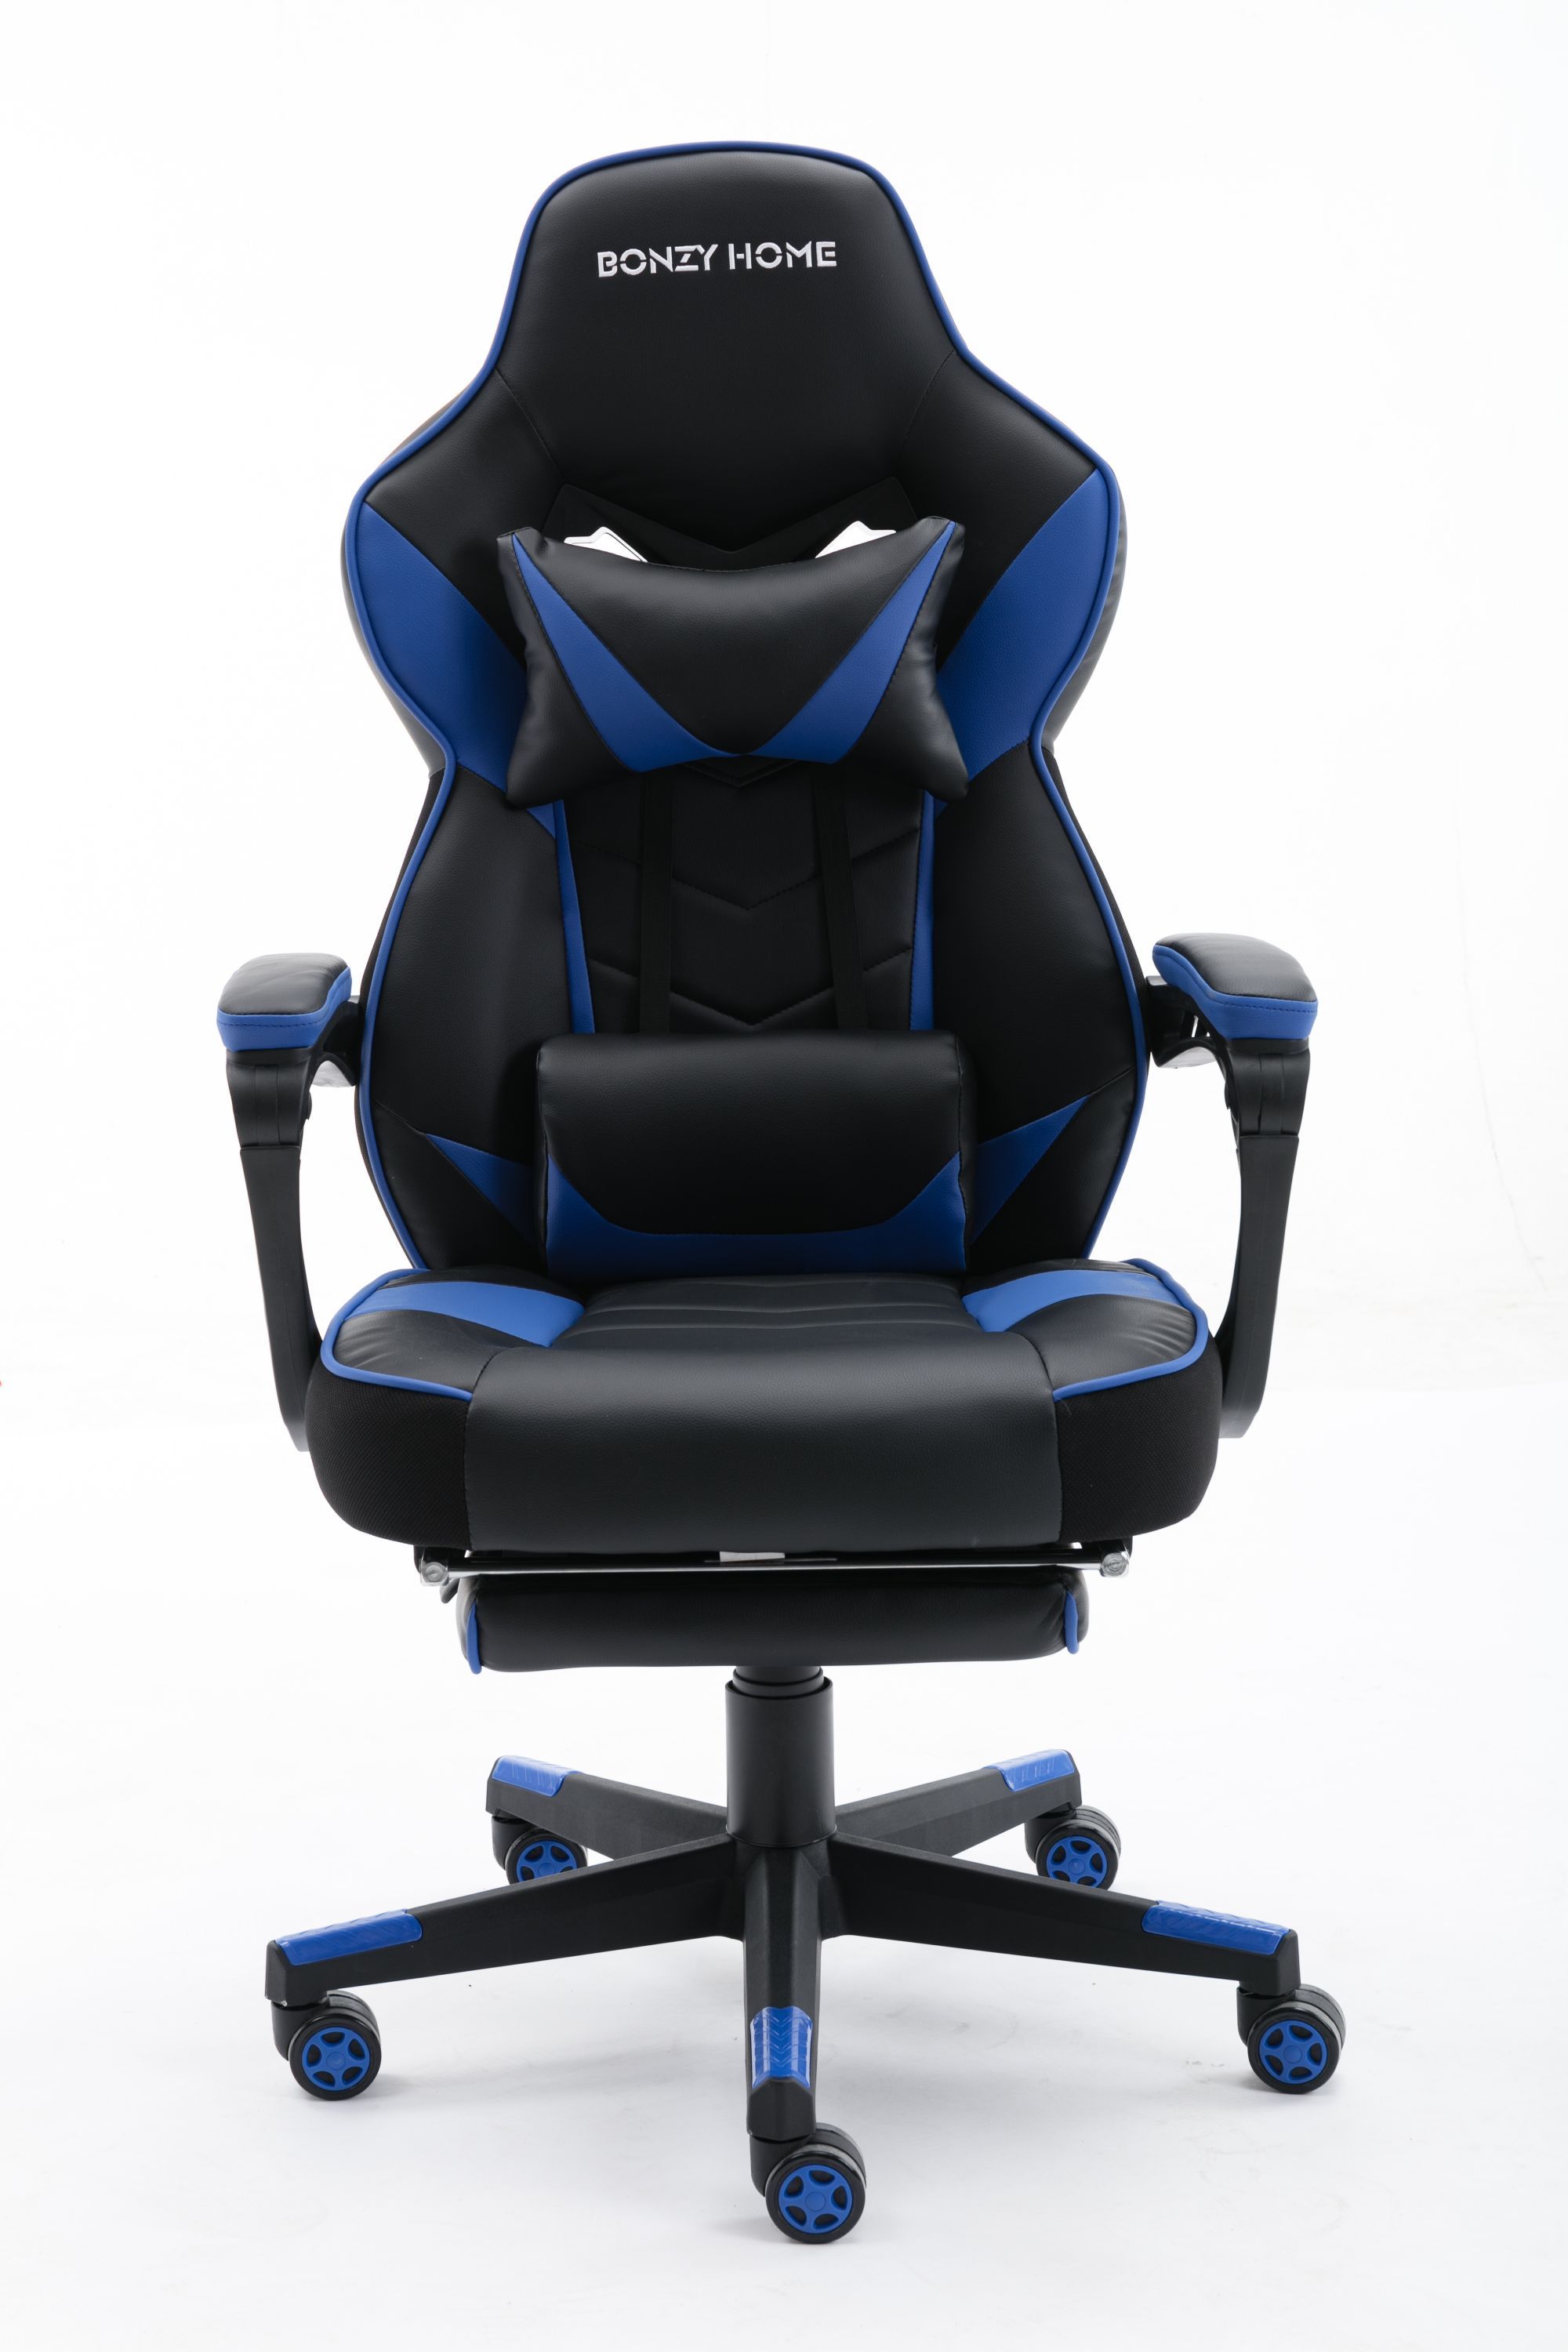 Details about   Gaming Chair Swivel Office Computer Desk Racing Ergonomic Executive PU Leather 